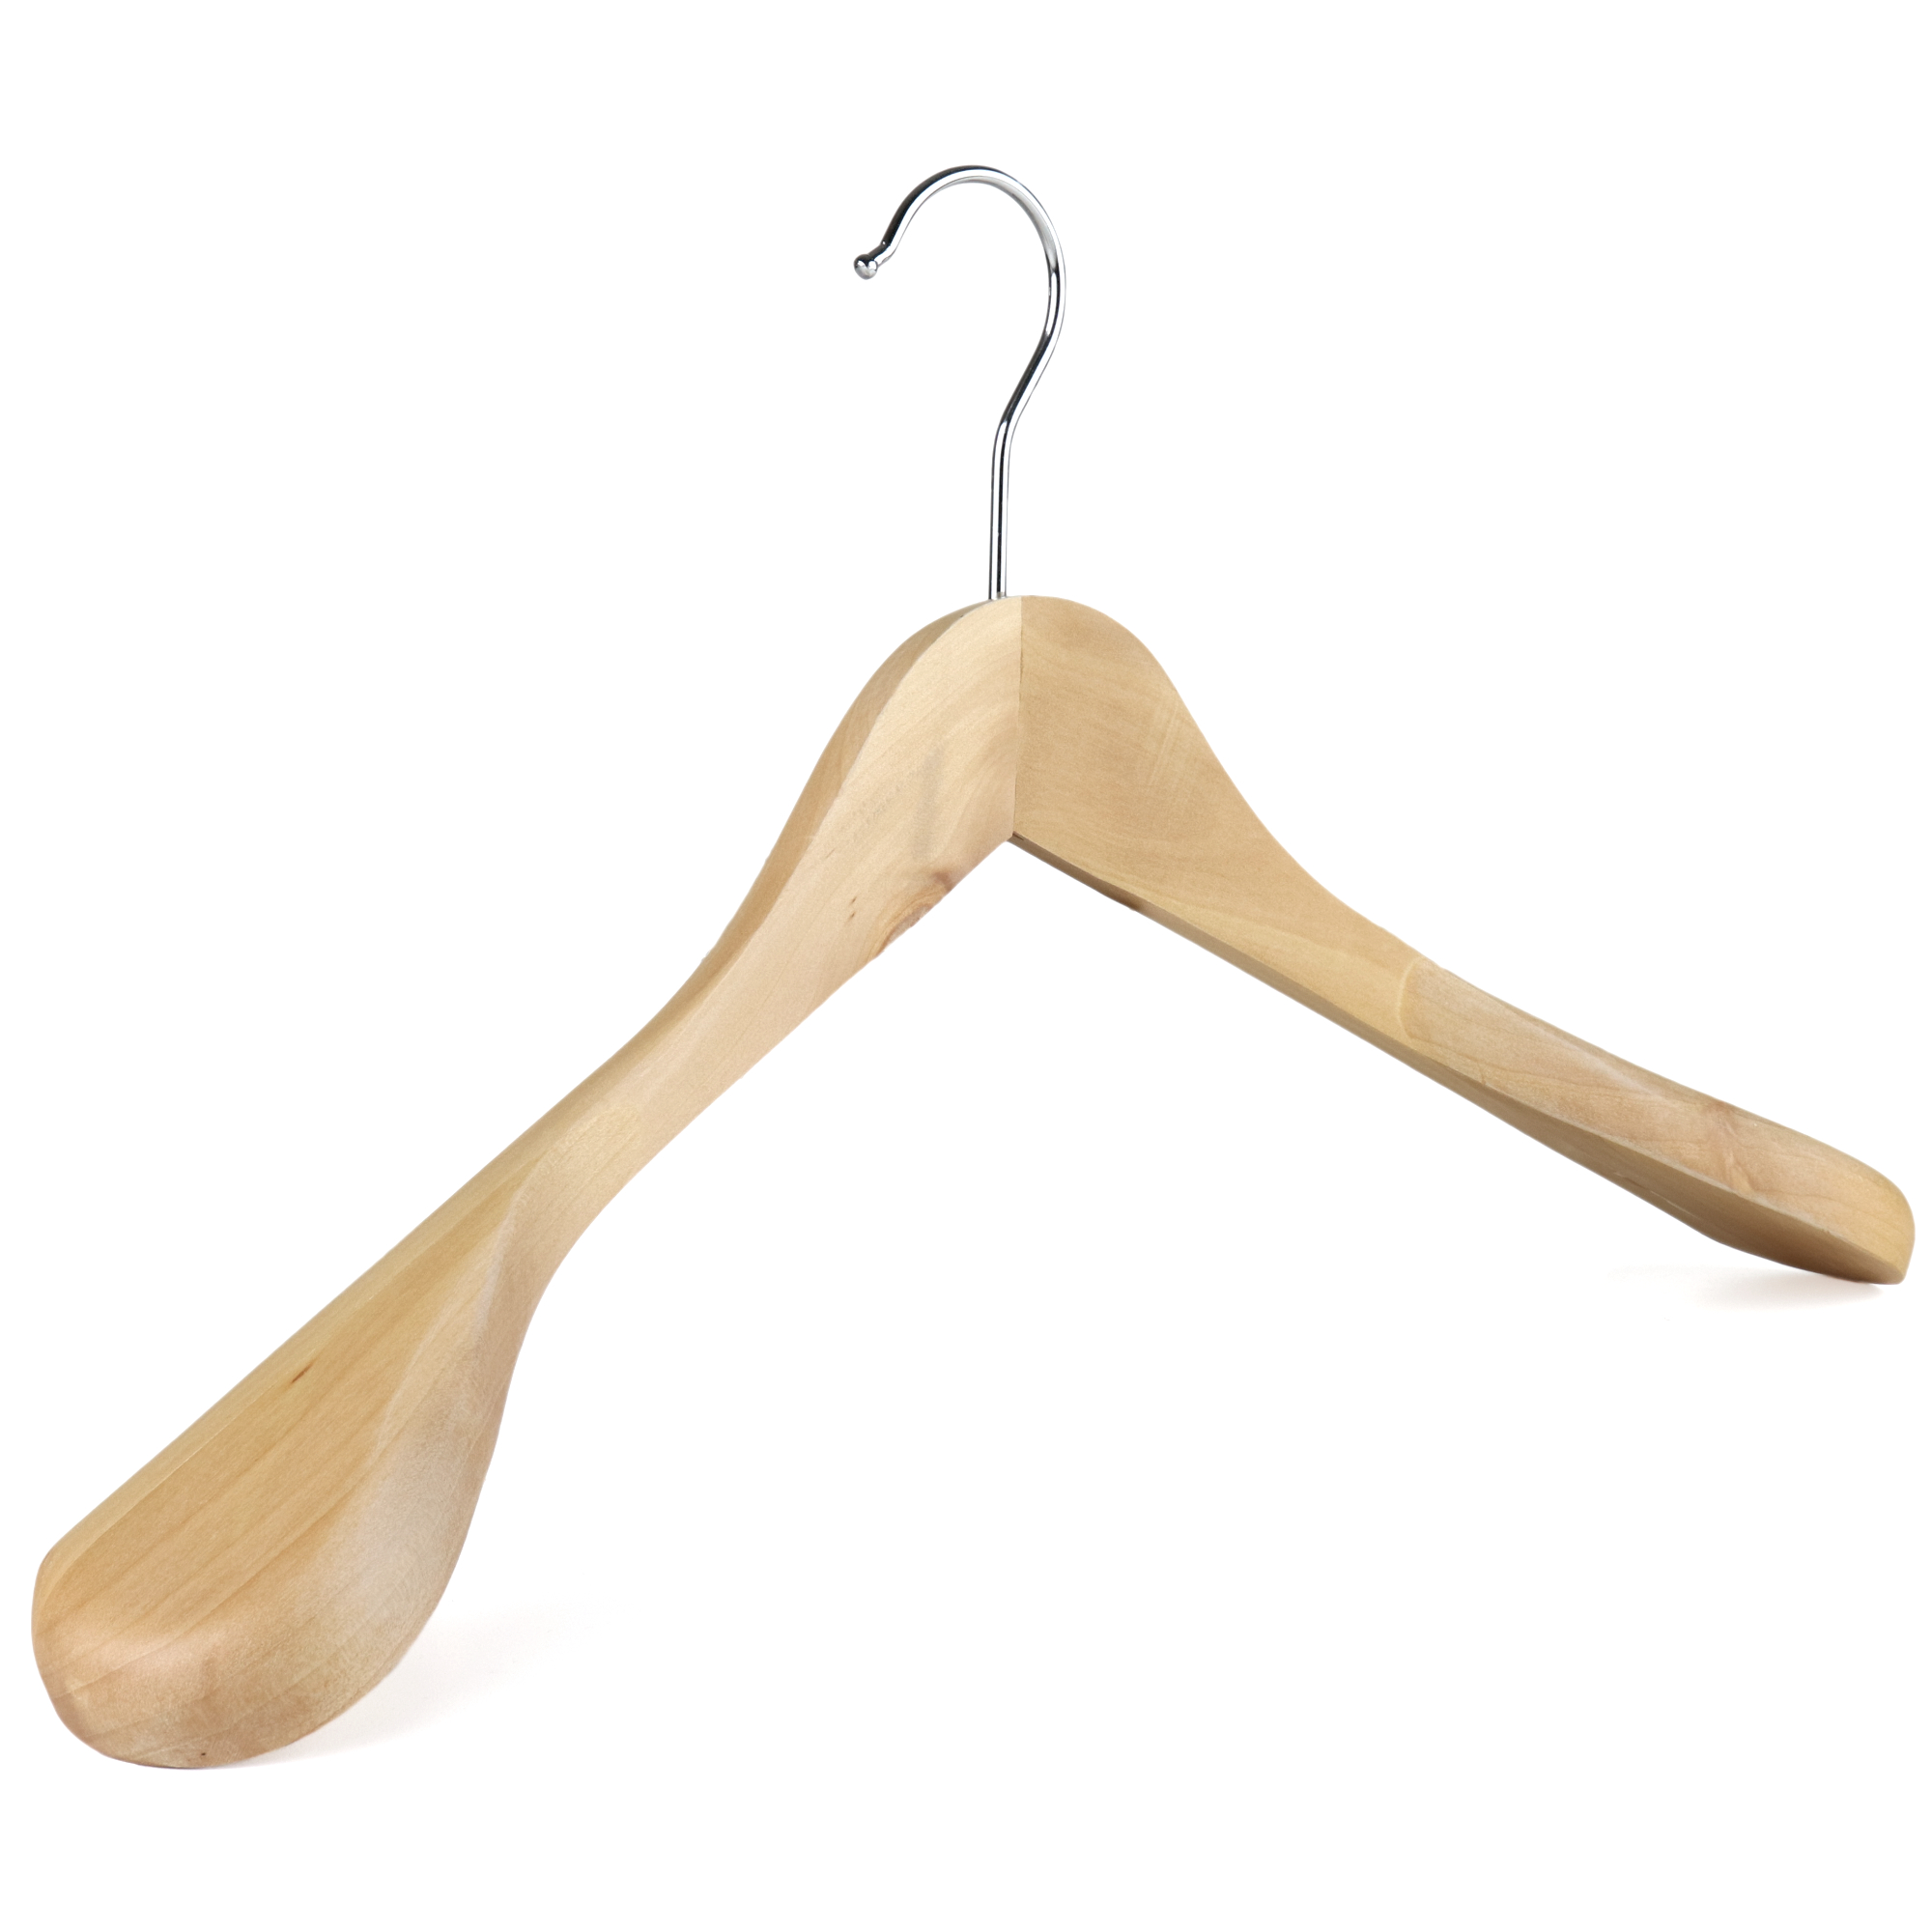 4 Plastic coat hangers with broad ends for coats and jackets-Choose Quantity & Hanger size 4 Hangers 